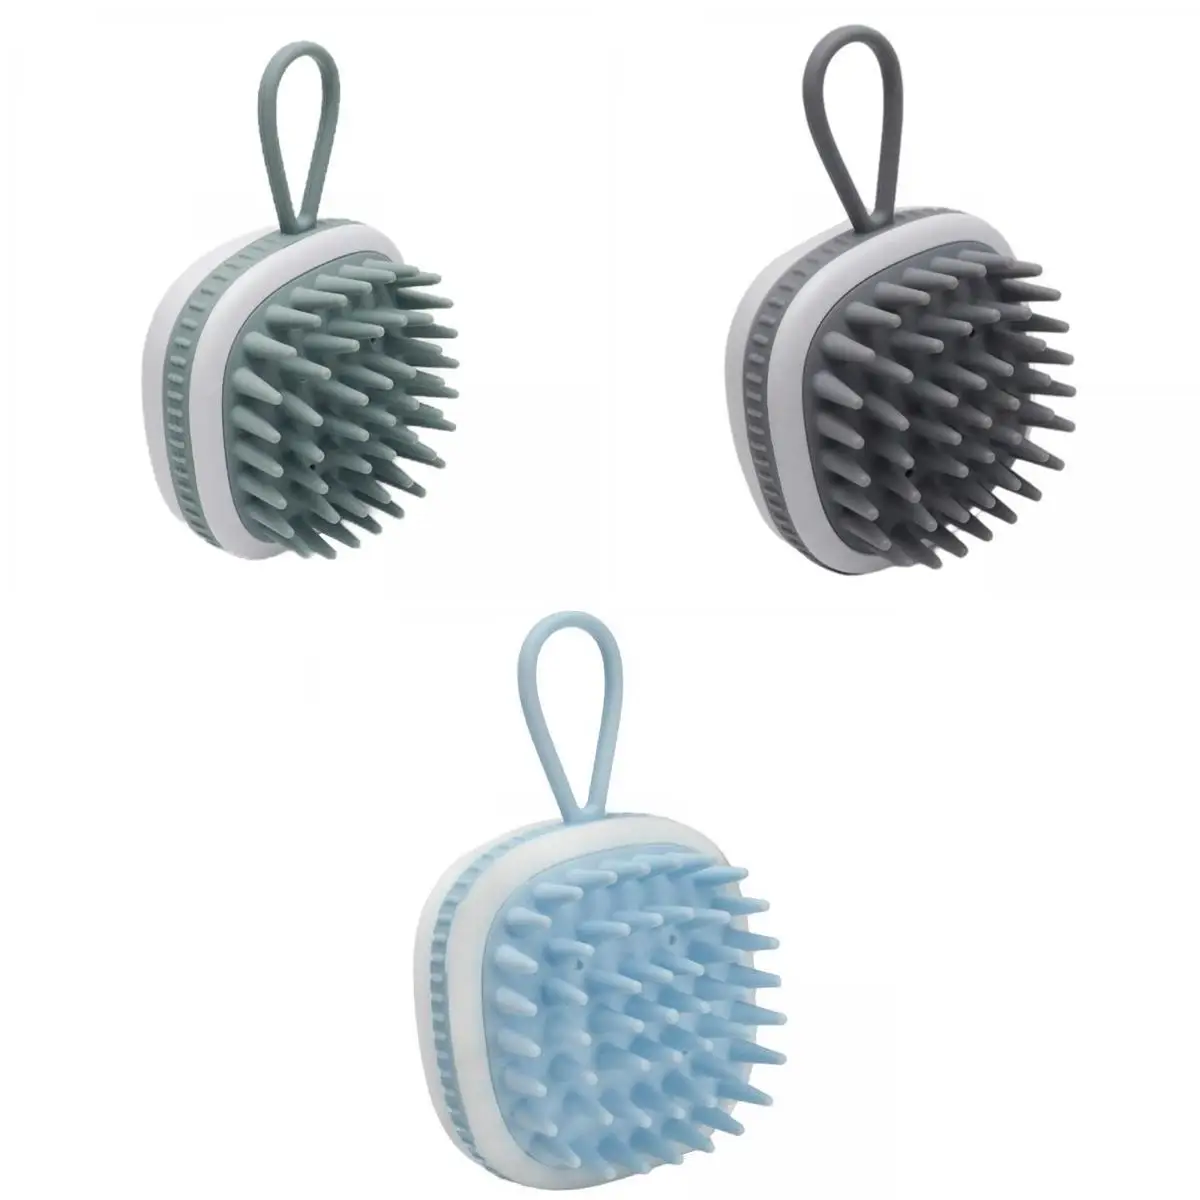 Pack-Silicone Hair Scalp Head Massager Shampoo Brush for